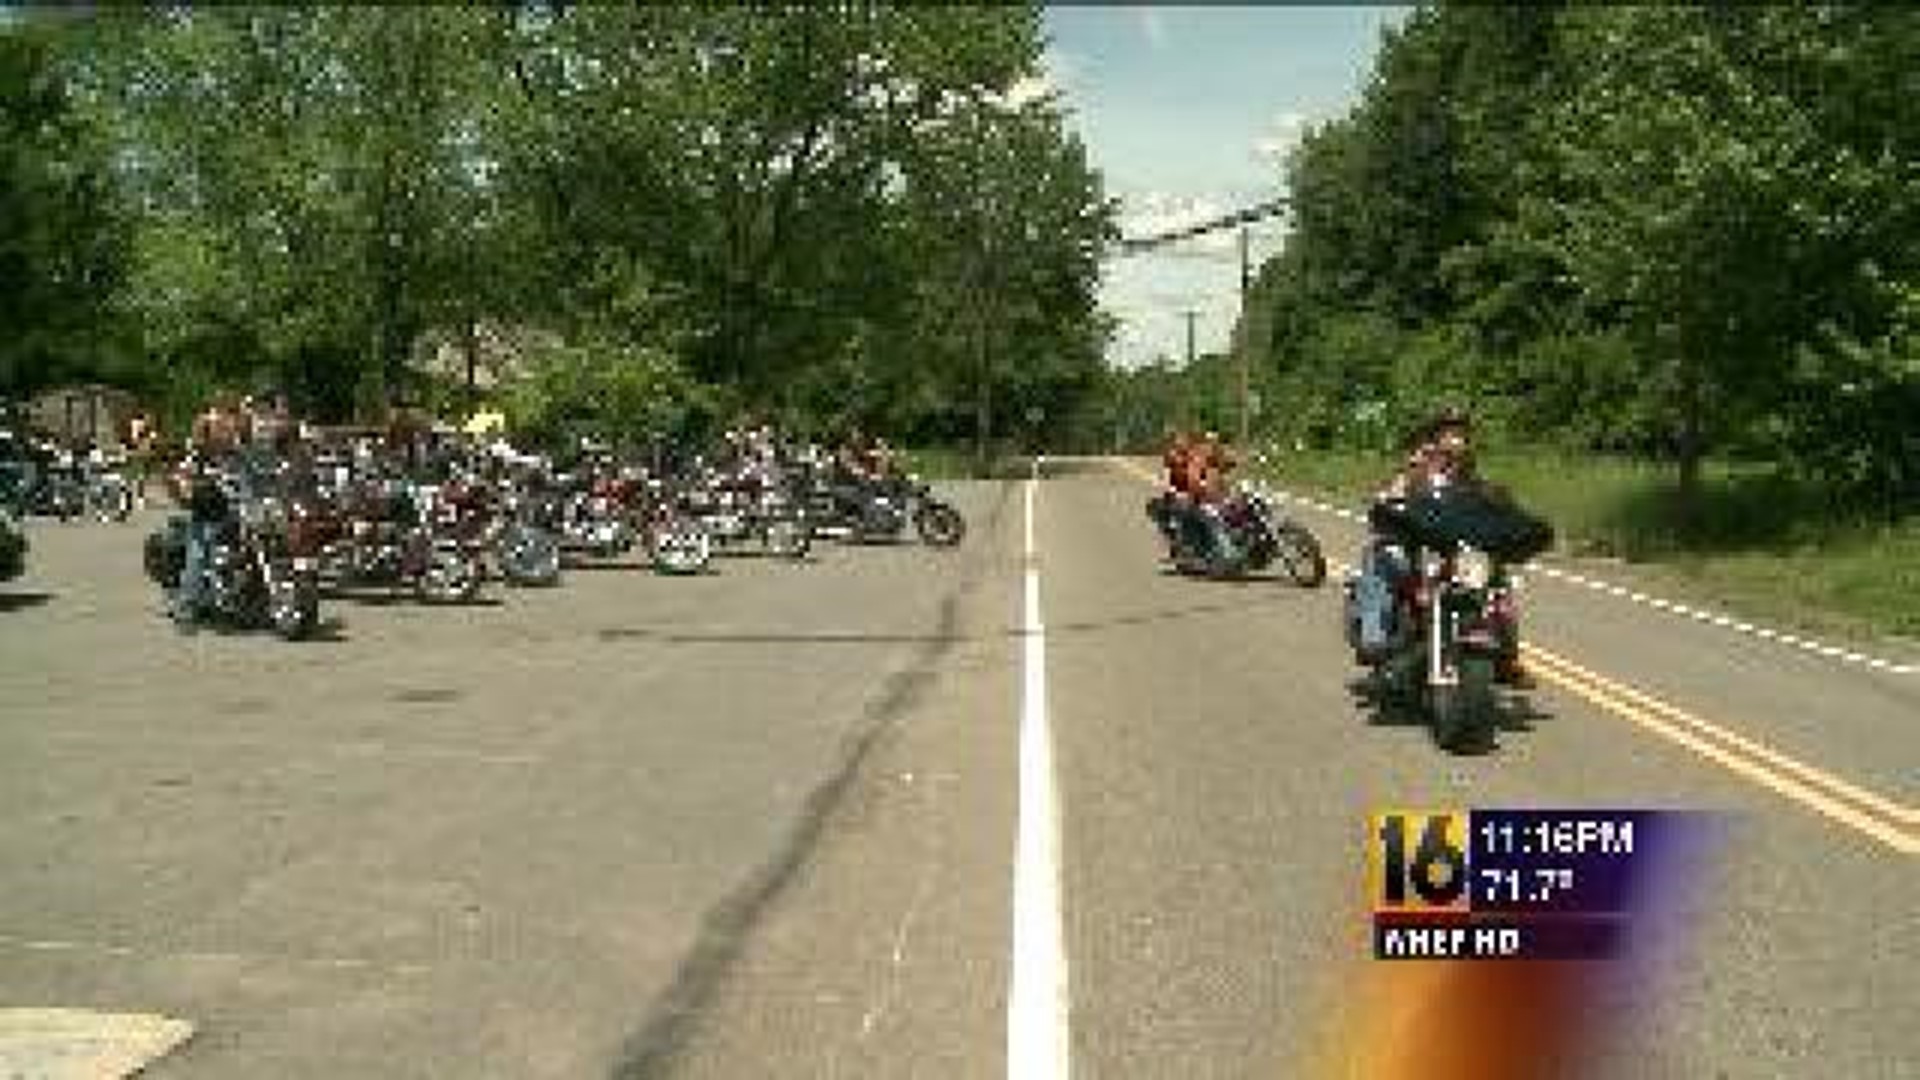 Motorcycles Roll Out To Help Kids